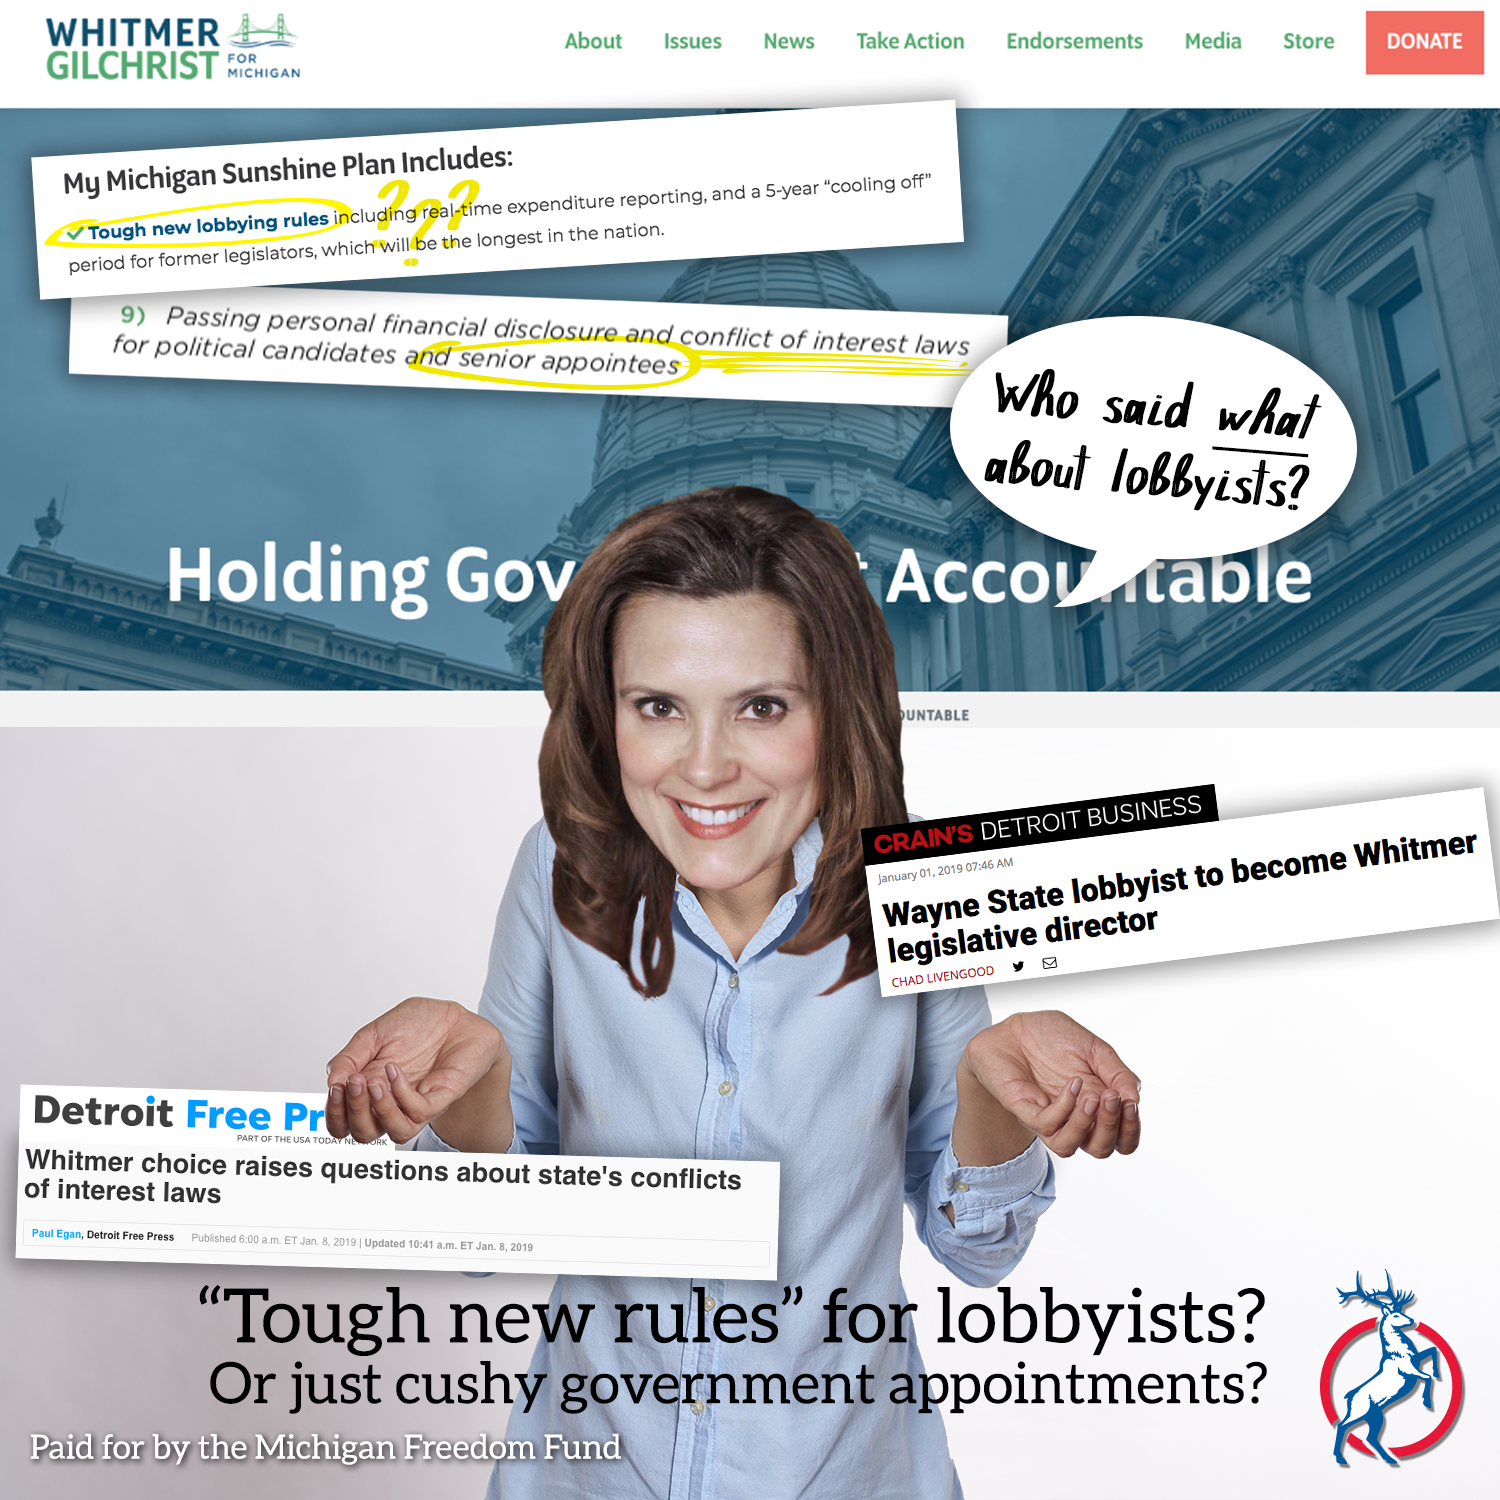 /campaigns/sitesapi/files/images/648799522/2019_01_08_Whitmer_Lobbyists.png